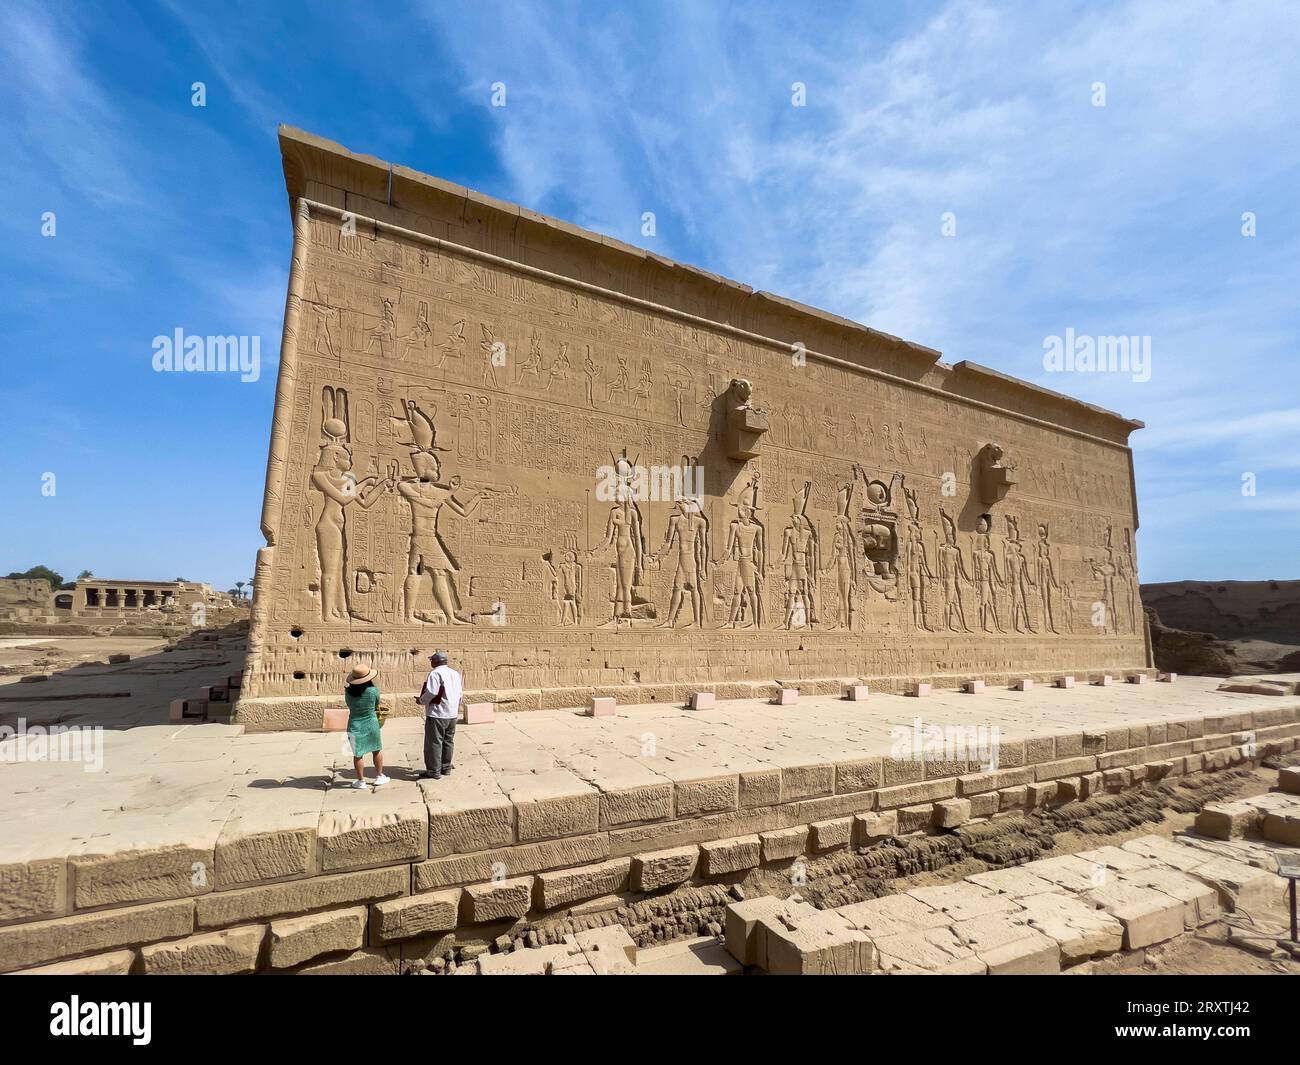 Reliefs of Cleopatra VII and her son by Julius Caesar, Caesarion at the Dendera Temple complex, Dendera, Egypt, North Africa, Africa Stock Photo